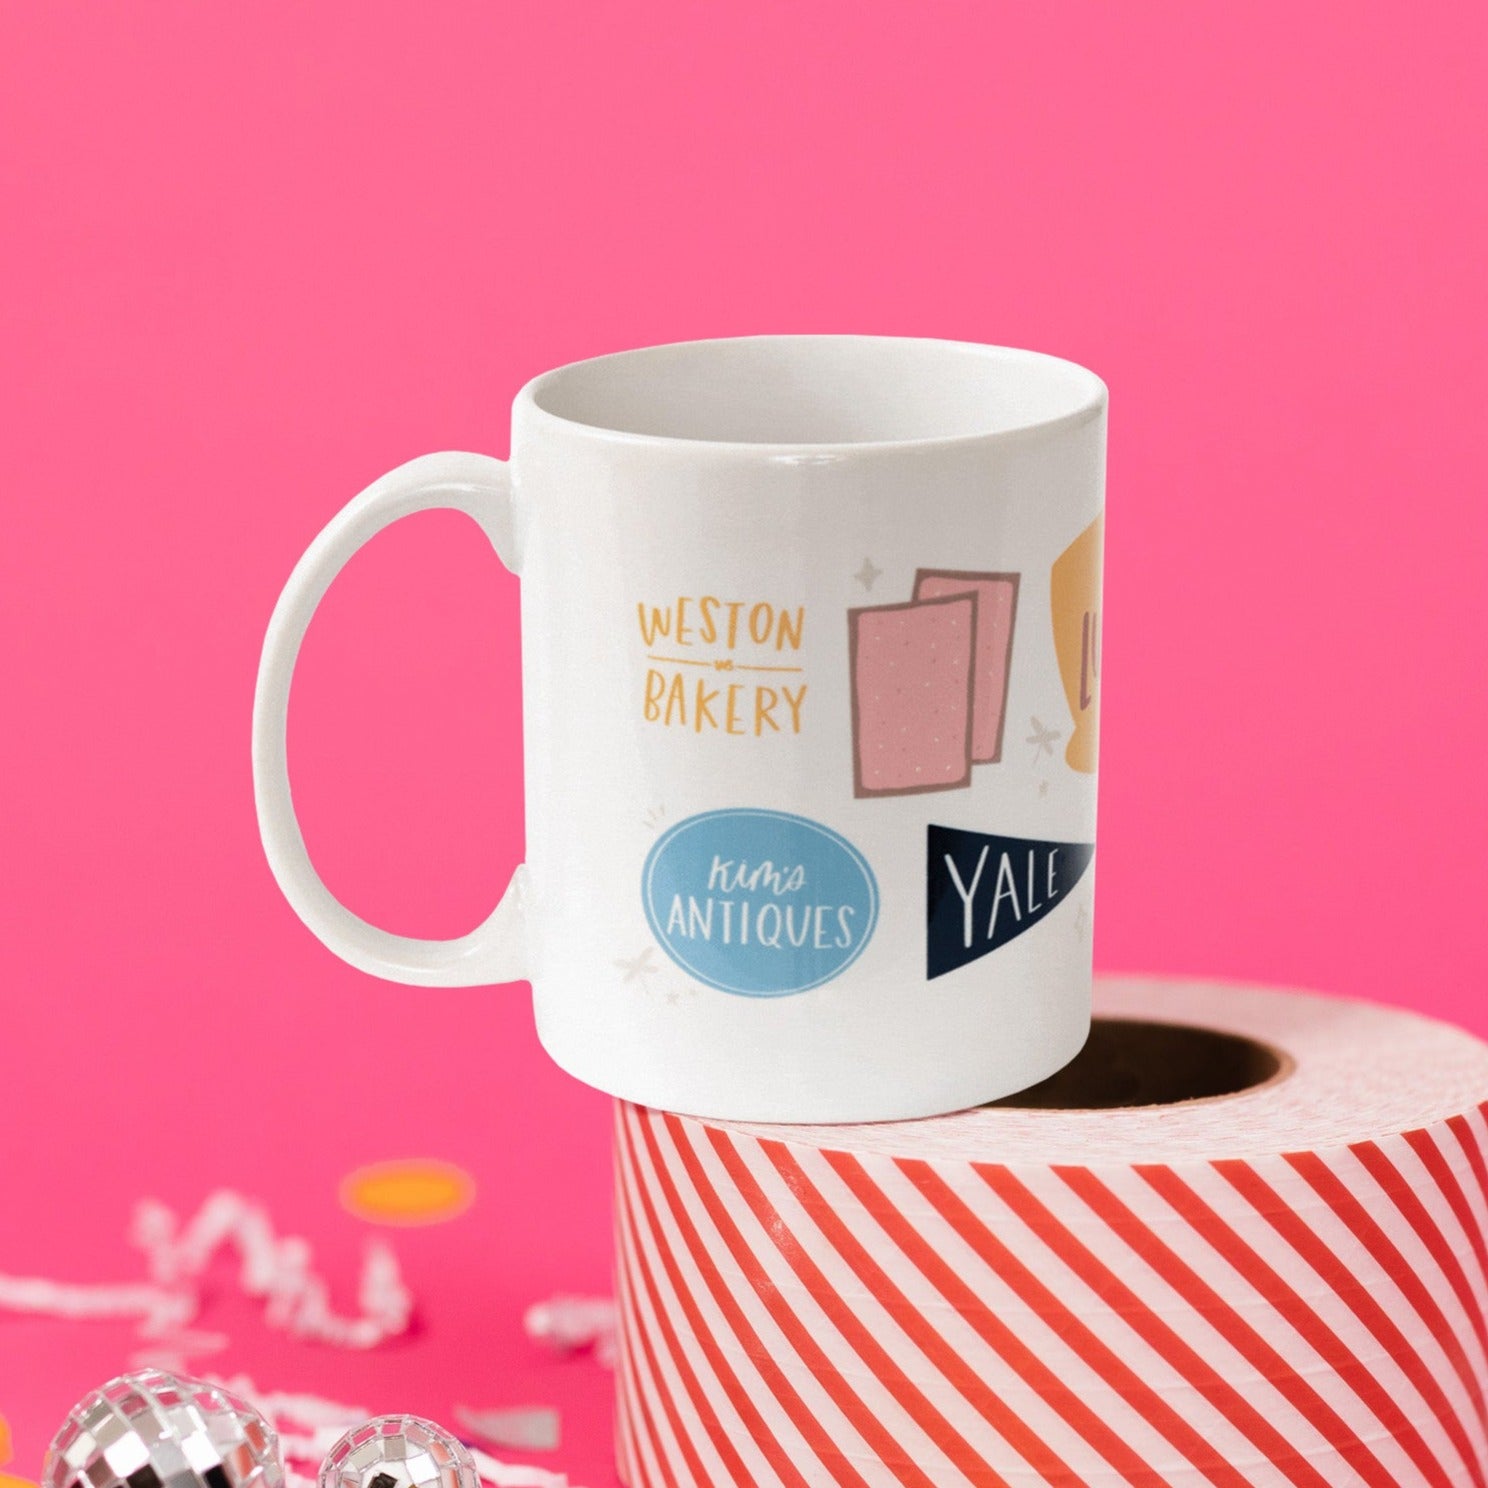 On a hot pink background sits a mug atop a red and white striped roll of packing tape with white confetti and big, colorful confetti scattered. There are mini disco balls. This Gilmore Girls inspired white mug has colorful illustrations from the show. It says "WESTON BAKERY" and "Kim's ANTIQUES." There are two pink menus and a navy school banner that says "YALE."